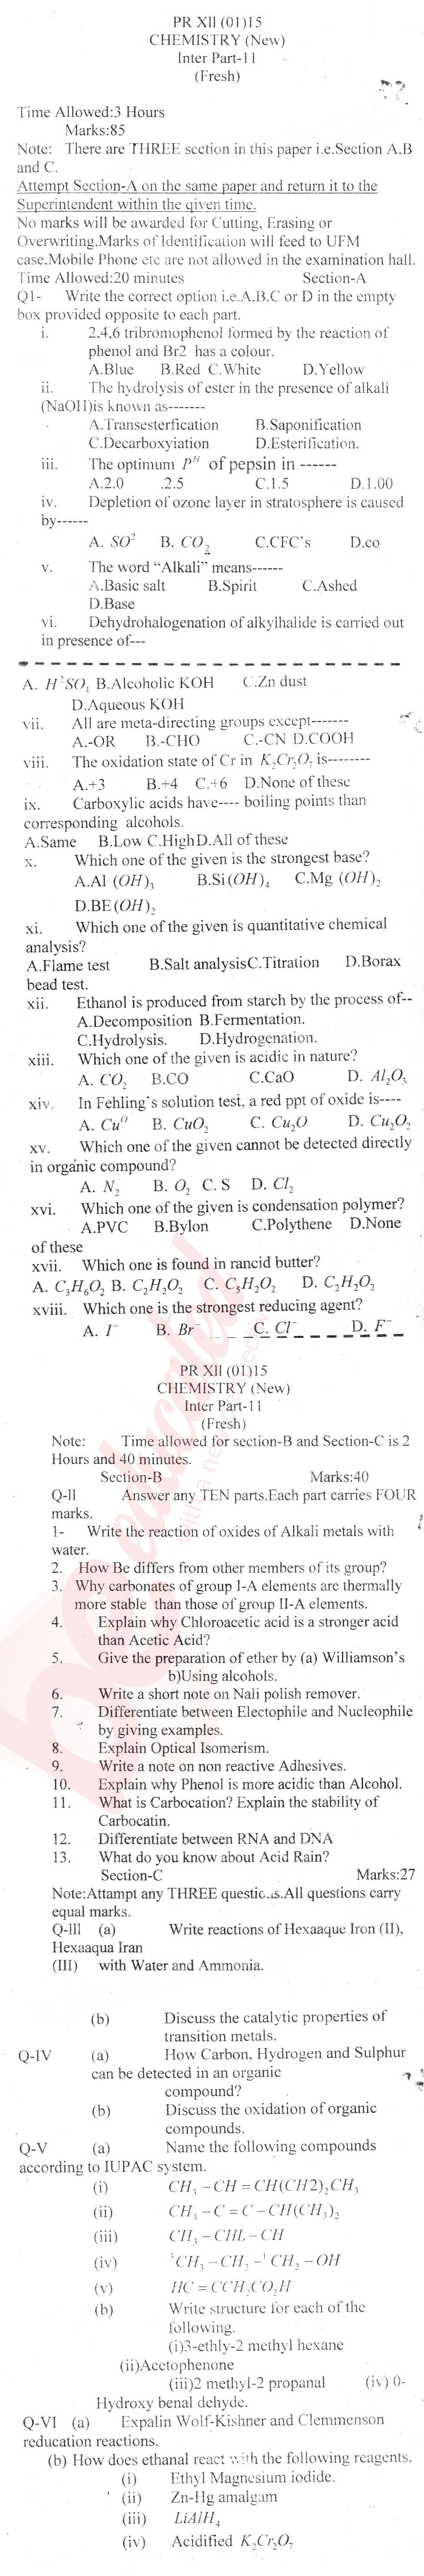 Chemistry FSC Part 2 Past Paper Group 1 BISE Malakand 2015